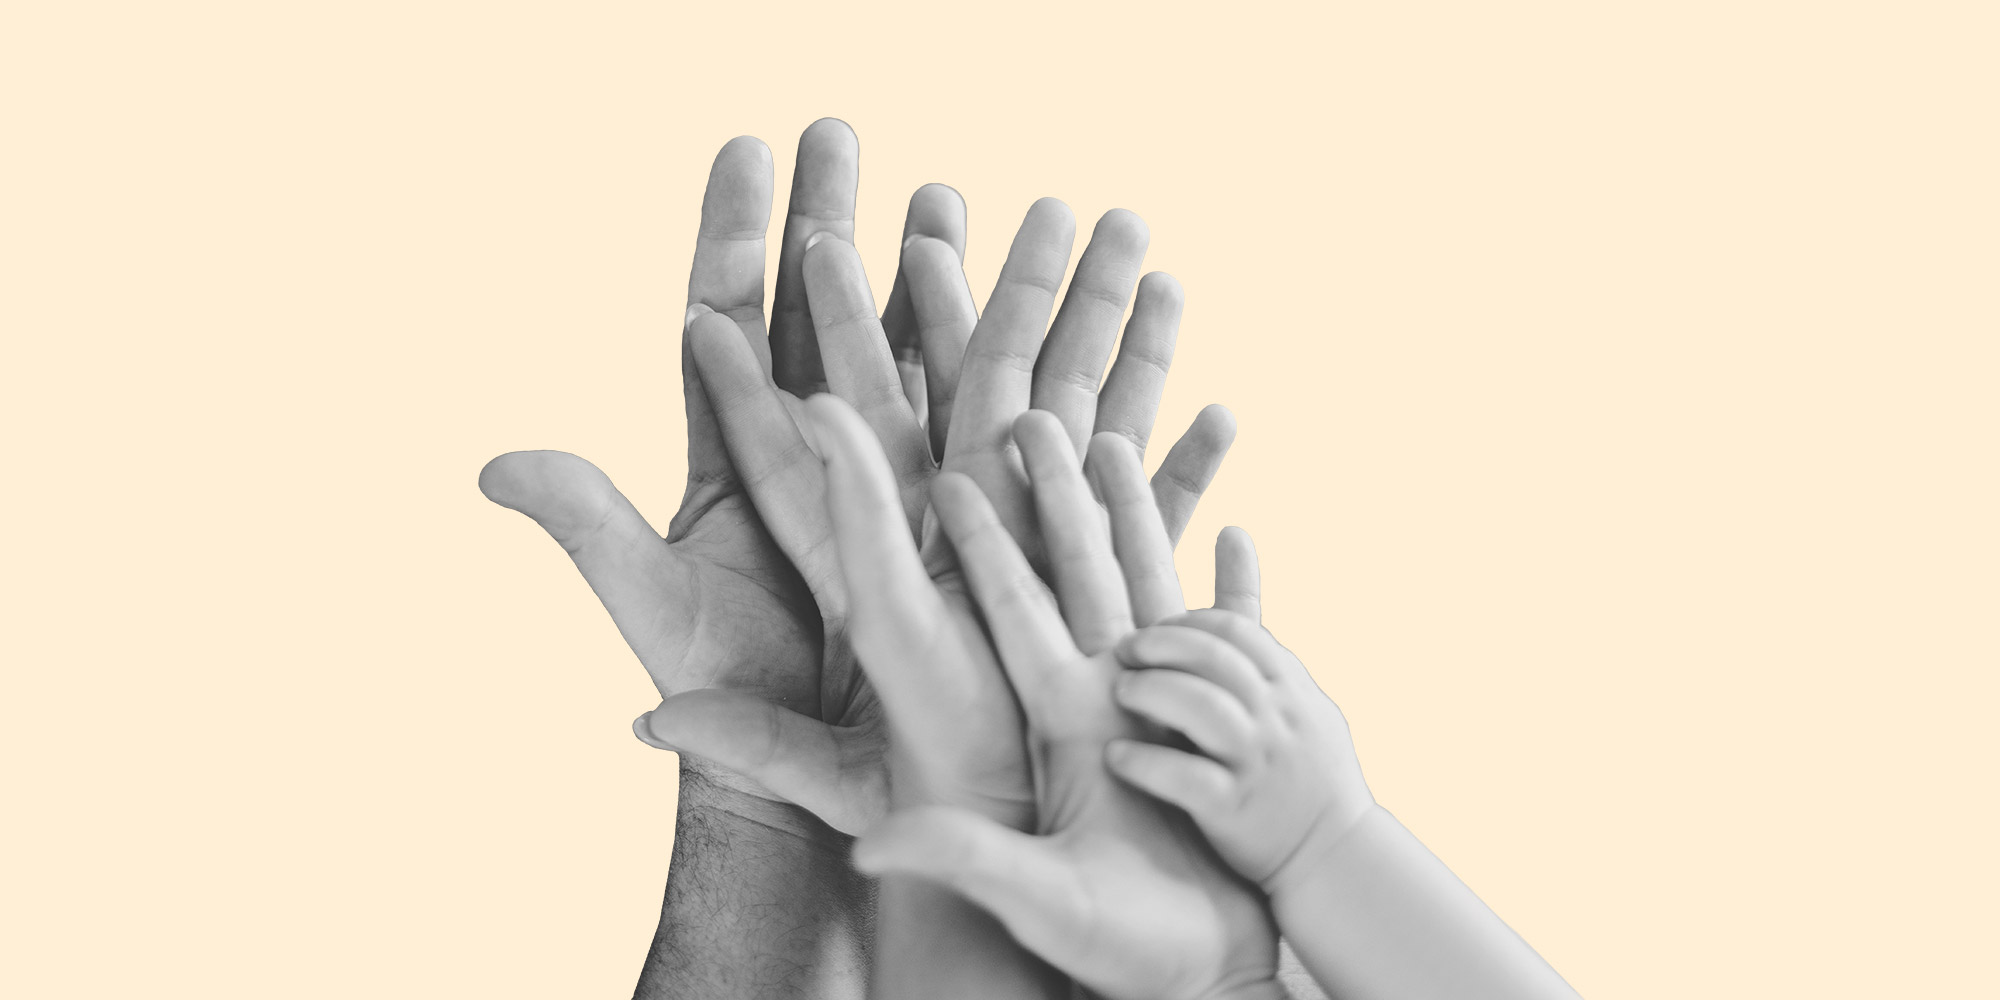 The hands of a man, woman, child, and baby, all pressed together. Parenting in recovery: Communication is key